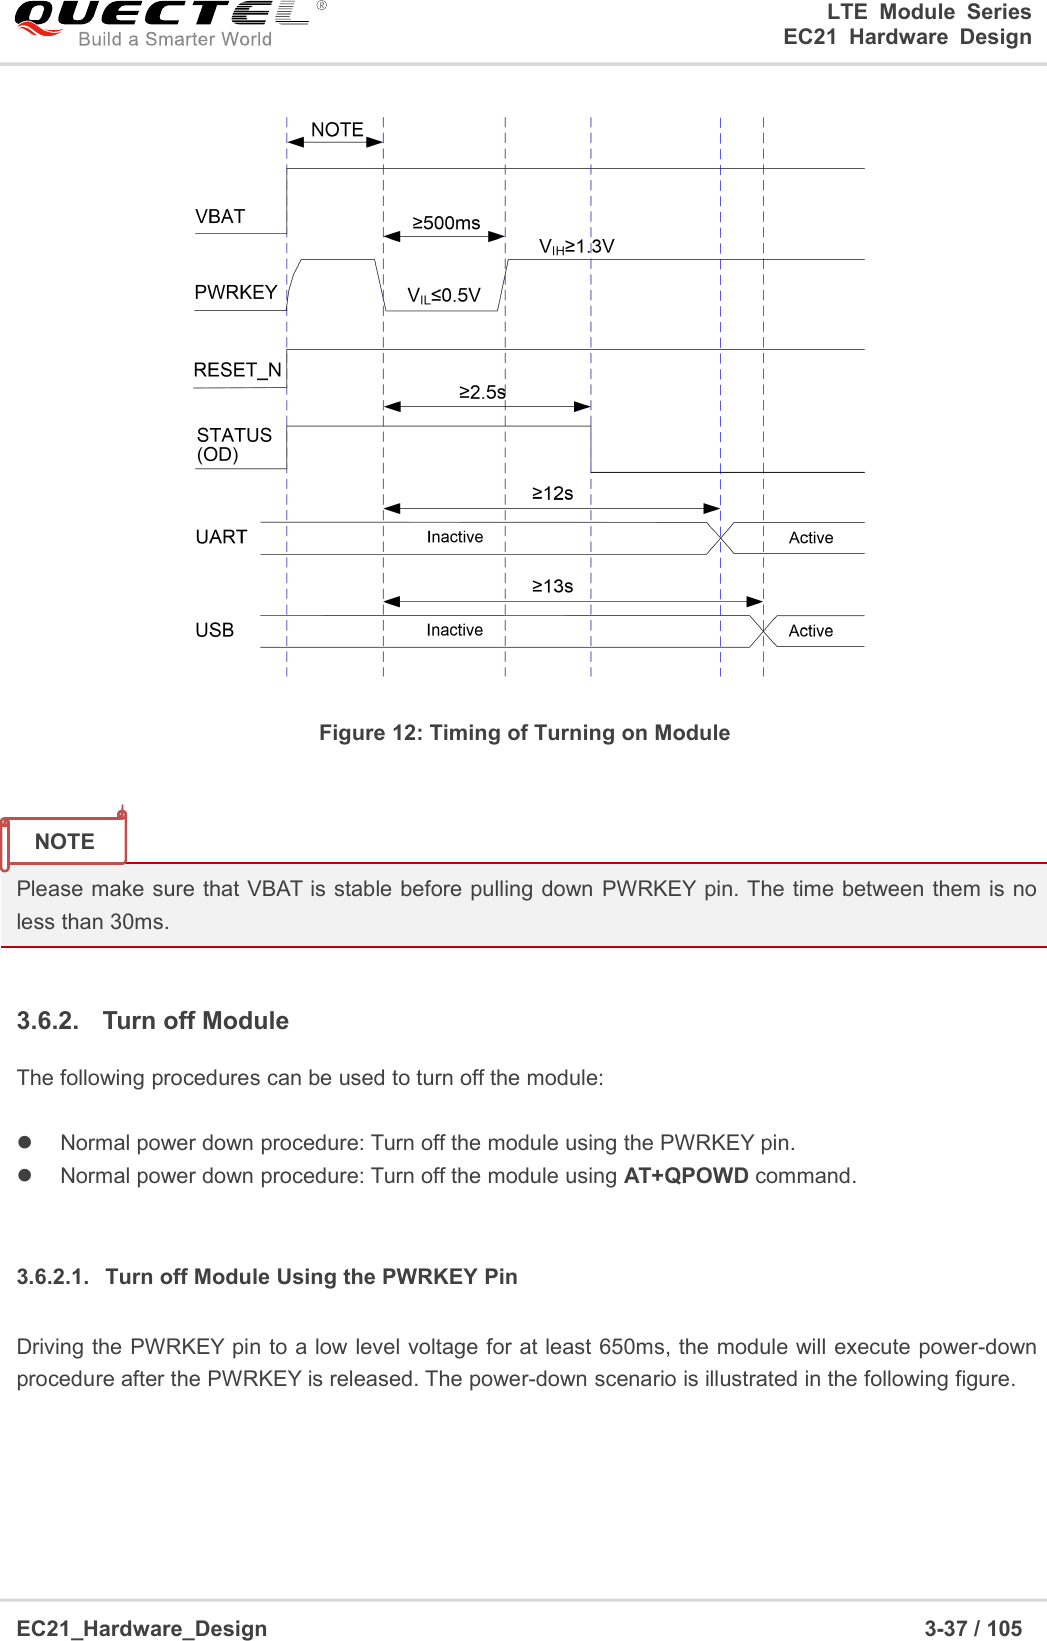 LTE Module SeriesEC21 Hardware DesignEC21_Hardware_Design 3-37 / 105Figure 12: Timing of Turning on ModulePlease make sure that VBAT is stable before pulling down PWRKEY pin. The time between them is noless than 30ms.3.6.2. Turn off ModuleThe following procedures can be used to turn off the module:Normal power down procedure: Turn off the module using the PWRKEY pin.Normal power down procedure: Turn off the module using AT+QPOWD command.3.6.2.1. Turn off Module Using the PWRKEY PinDriving the PWRKEY pin to a low level voltage for at least 650ms, the module will execute power-downprocedure after the PWRKEY is released. The power-down scenario is illustrated in the following figure.NOTE